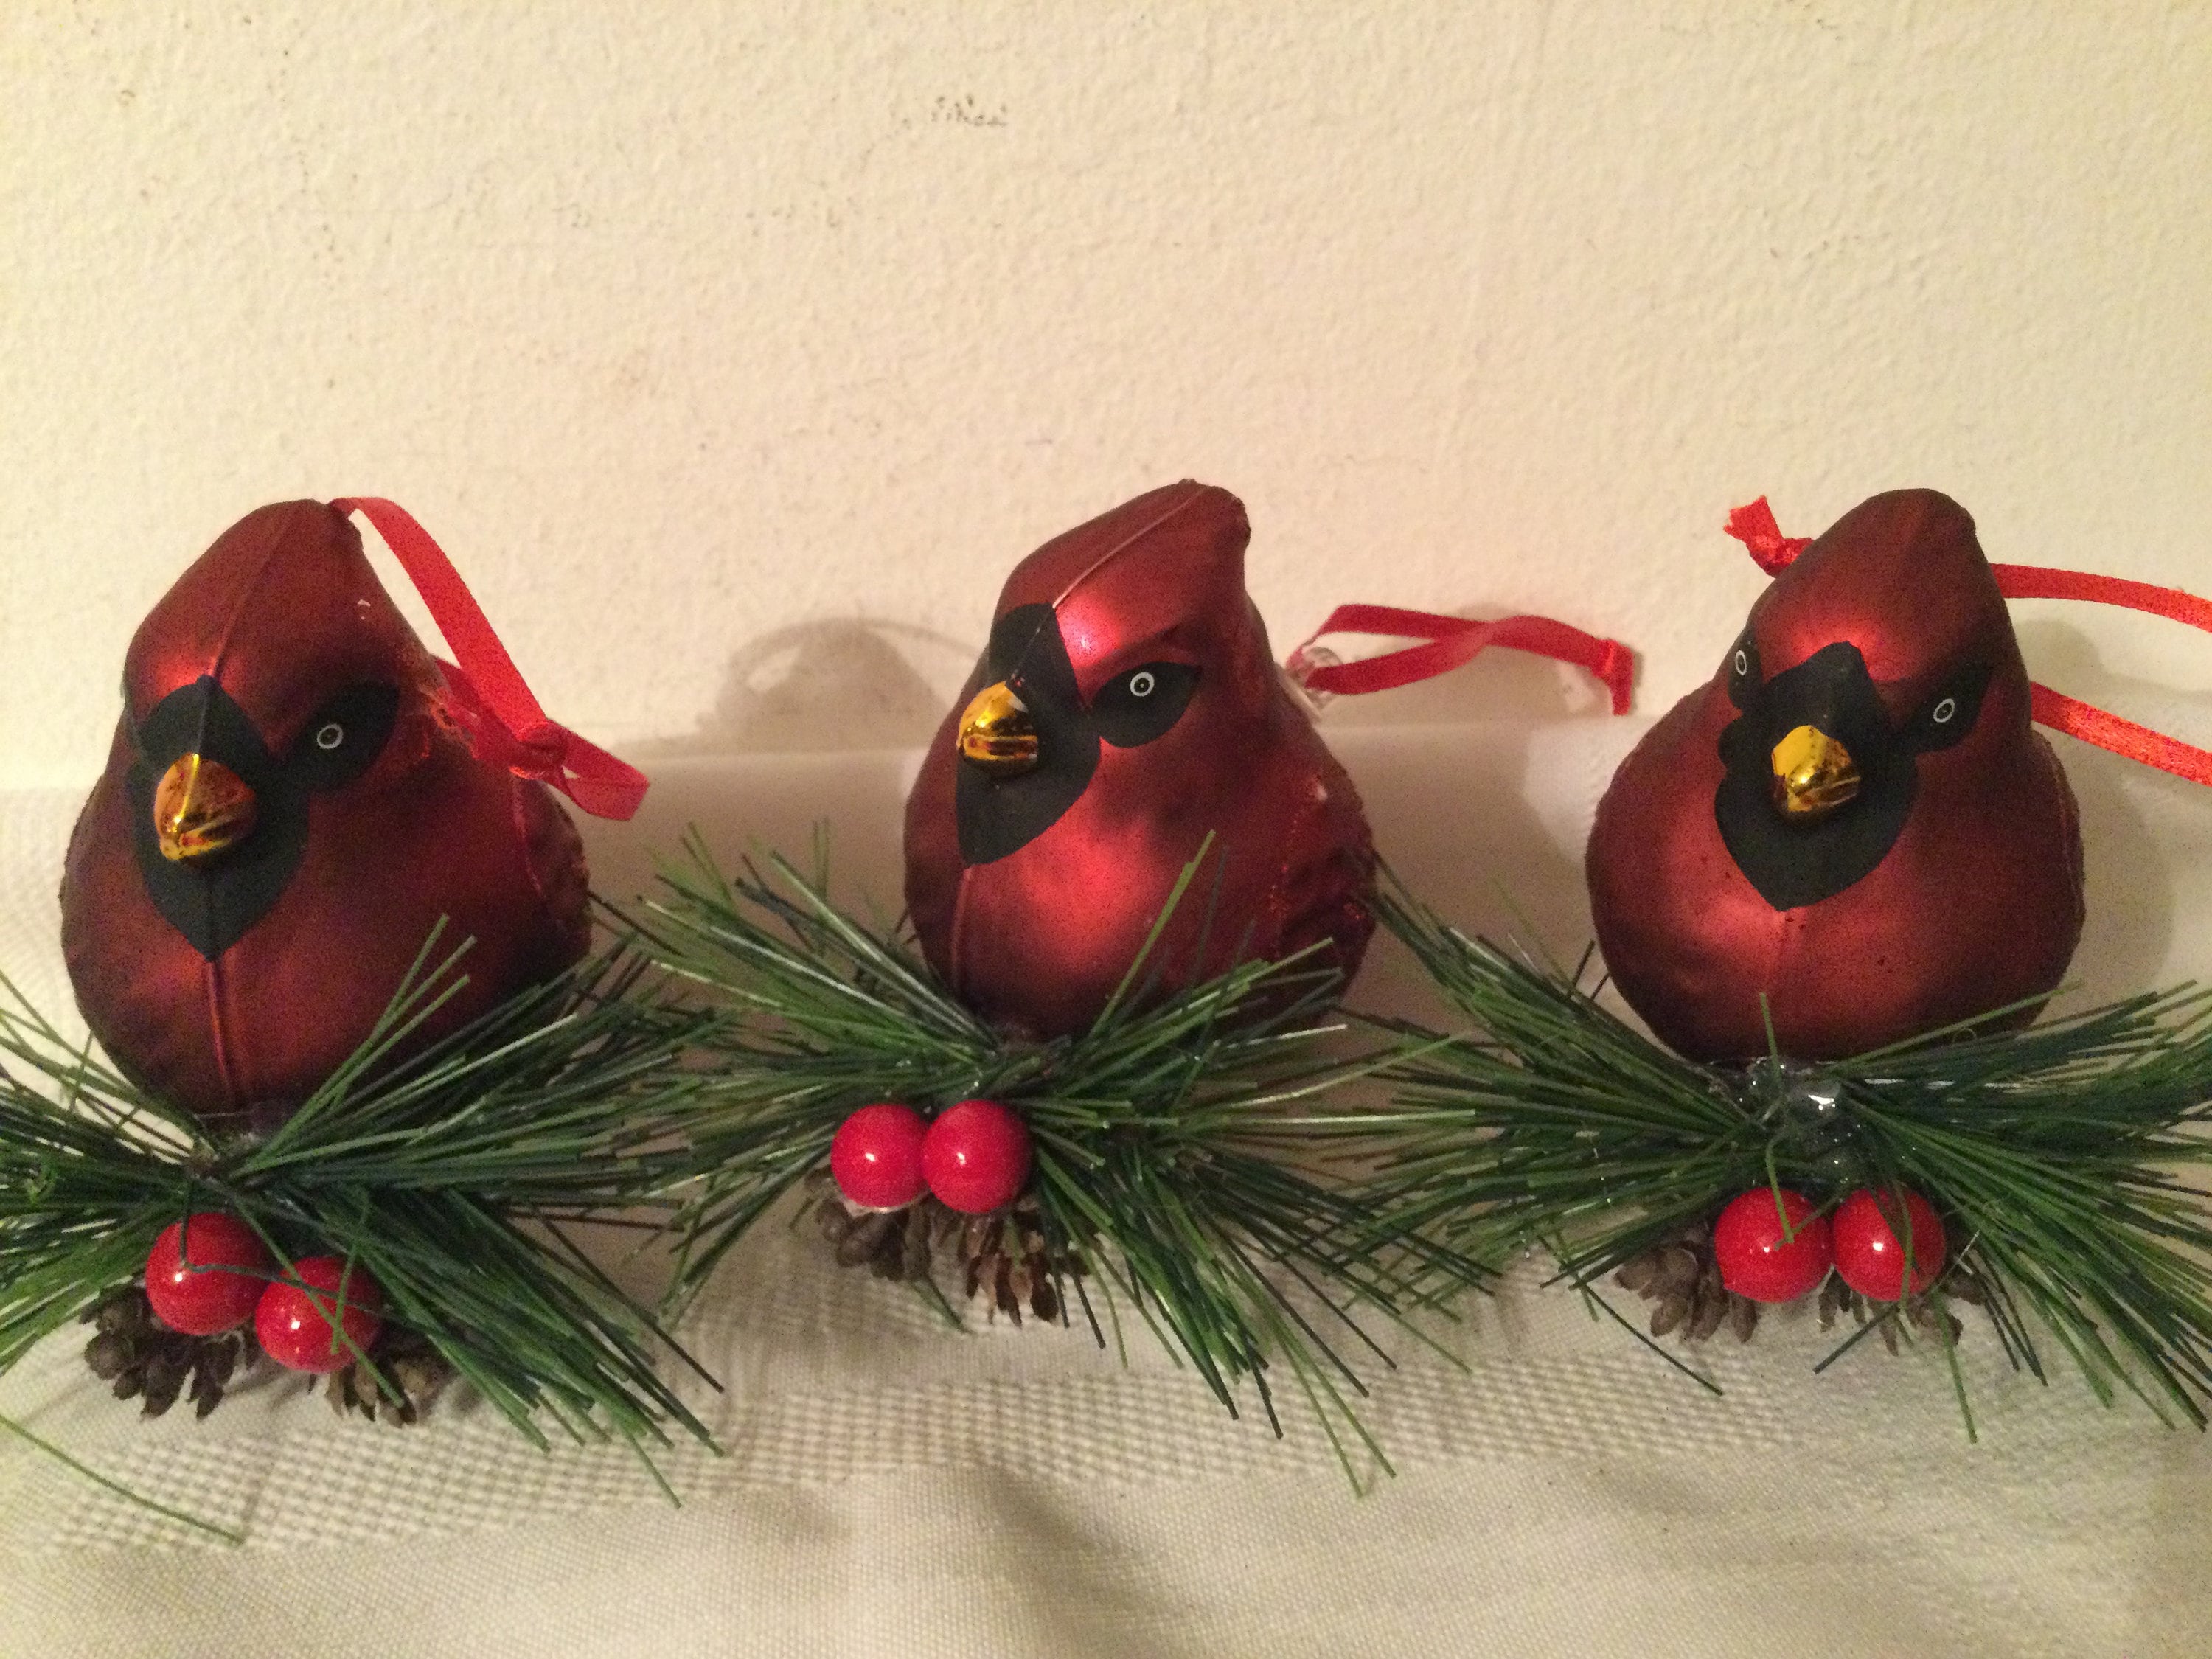 ORNAMENTS CHRISTMAS TWO CARDINAL BIRDS ON HORN WITH HOLLY/PINECONES RED BERRIES 